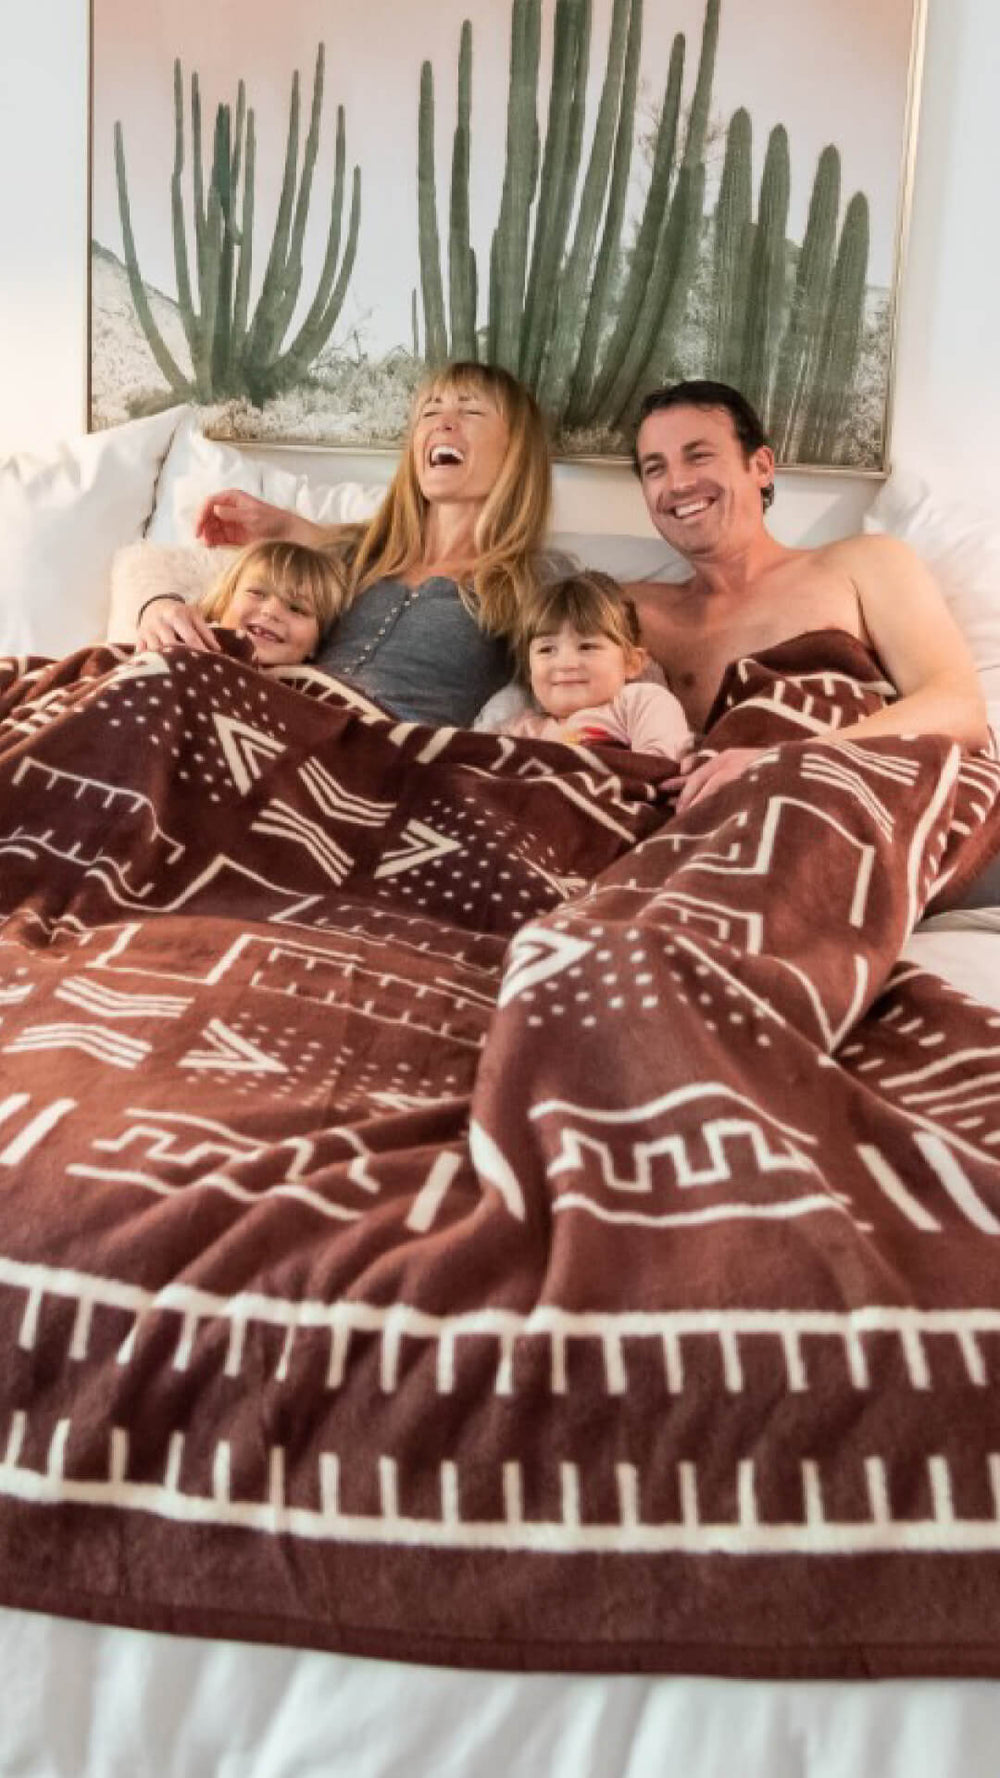 How To: Buying Guide on Finding the Right Throw Blanket - Fleece Flann —  DaDalogy Bedding Collection